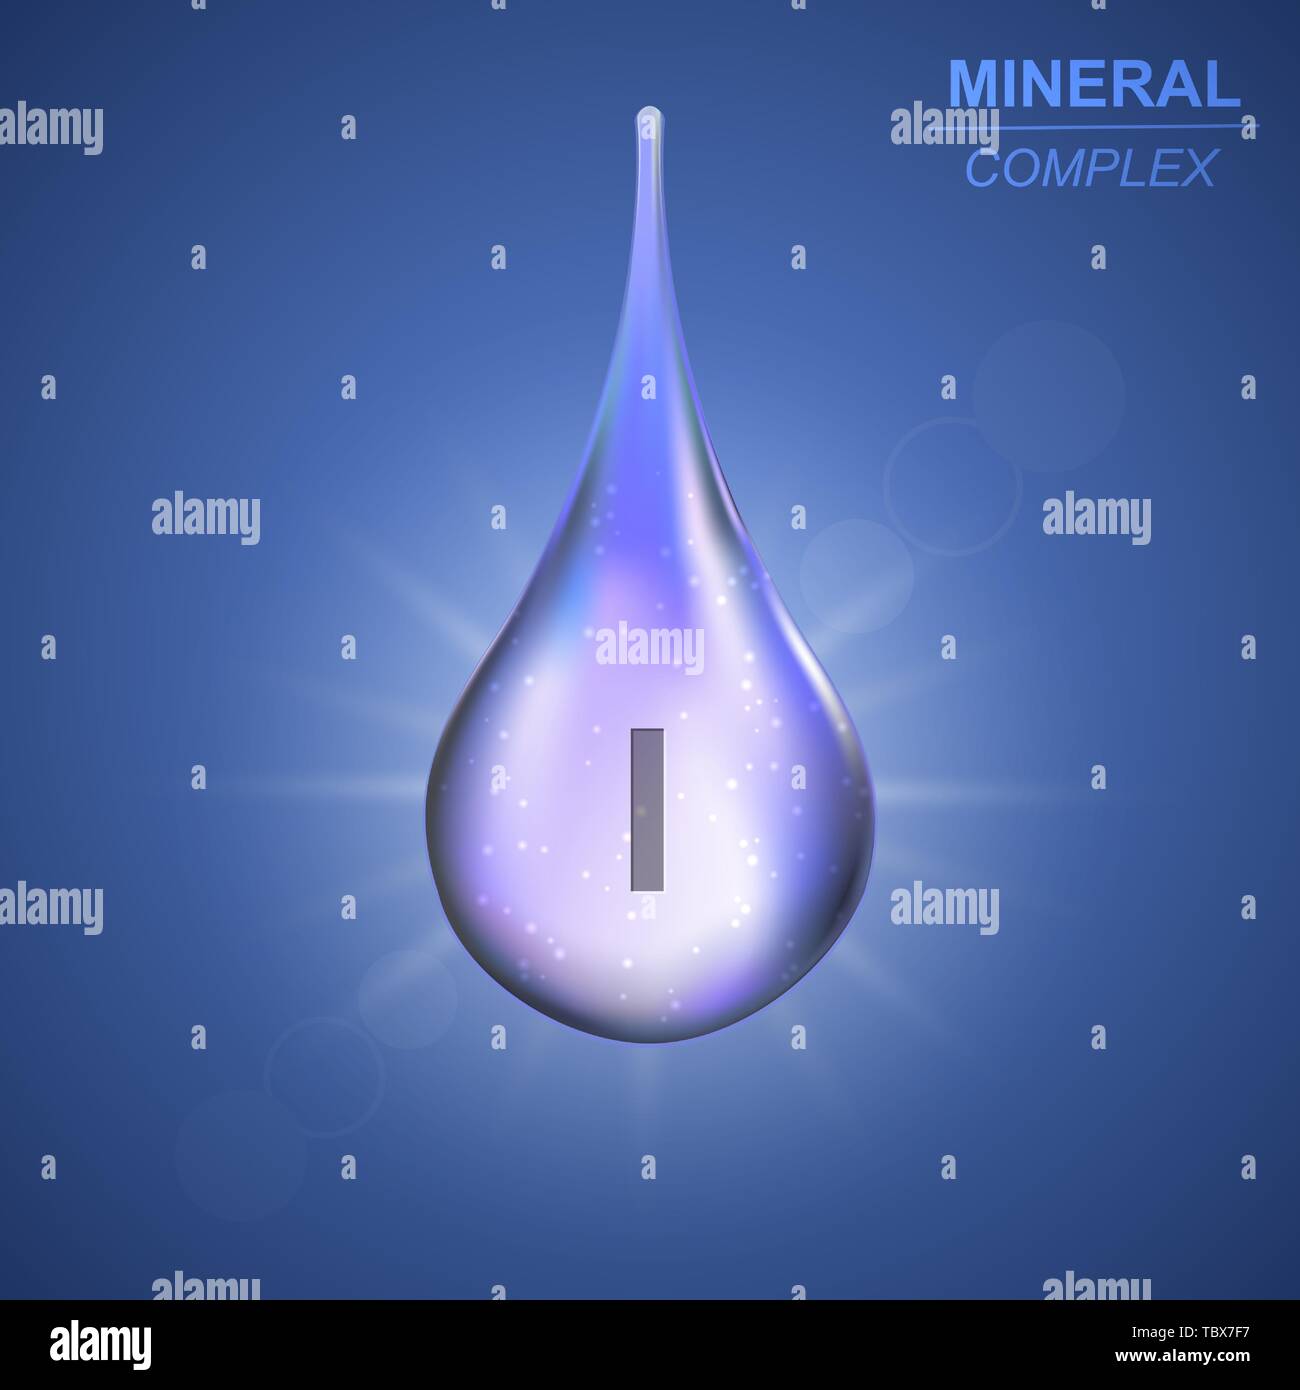 Iodine Mineral shining blue drop icon .Mineral complex background Stock Vector